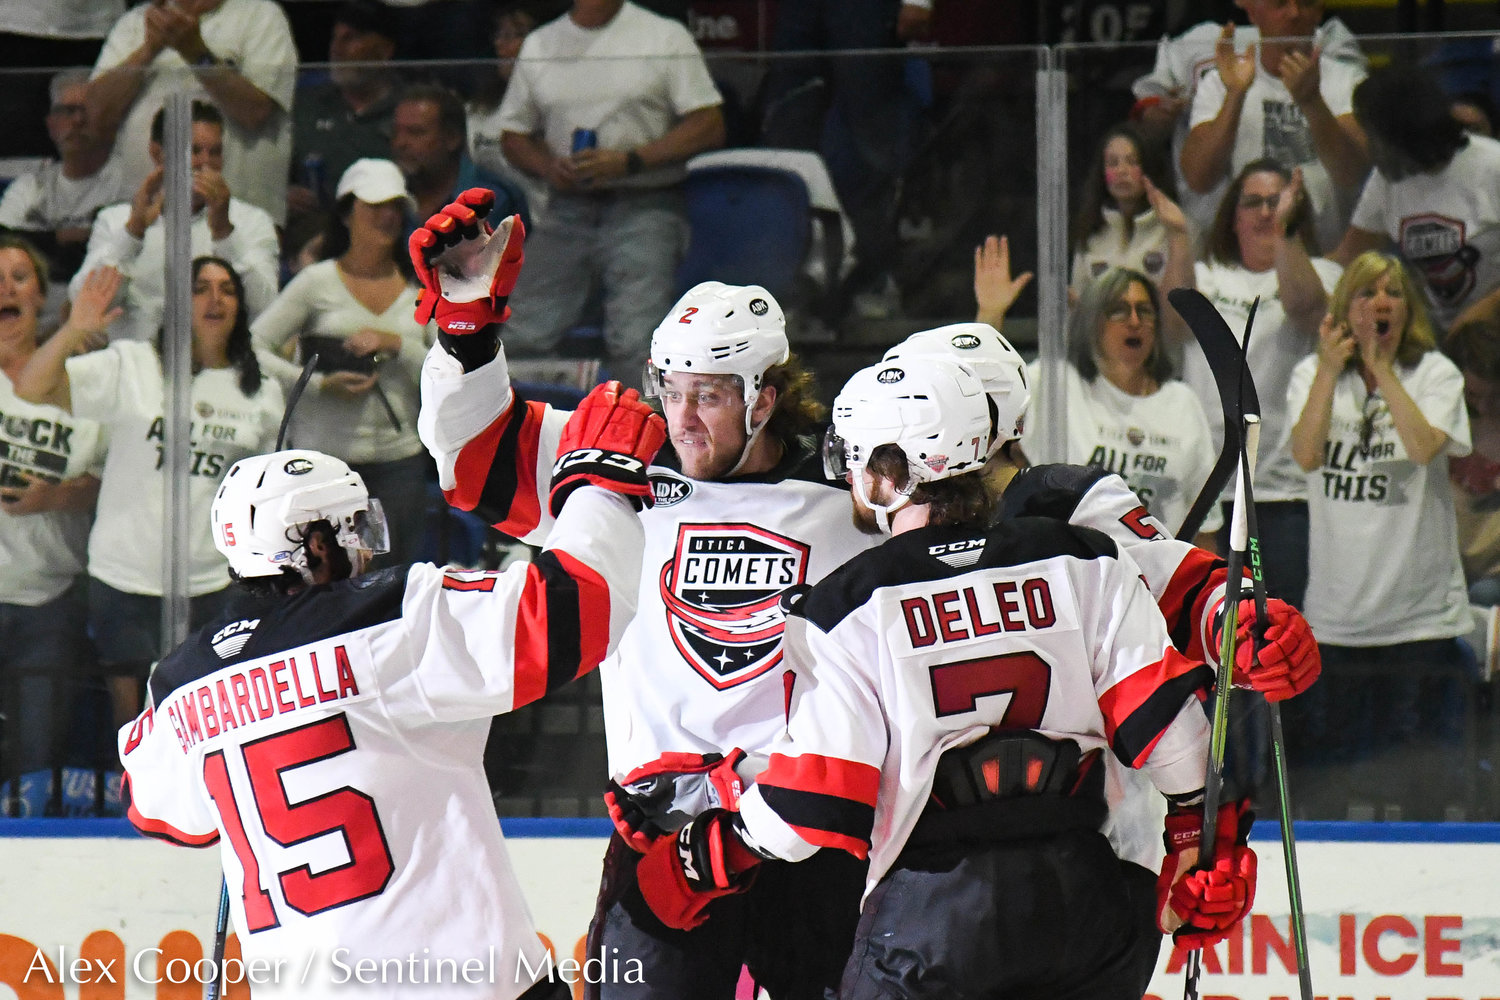 Comets players celebrate a goal during the playoff game against Rochester on Saturday.